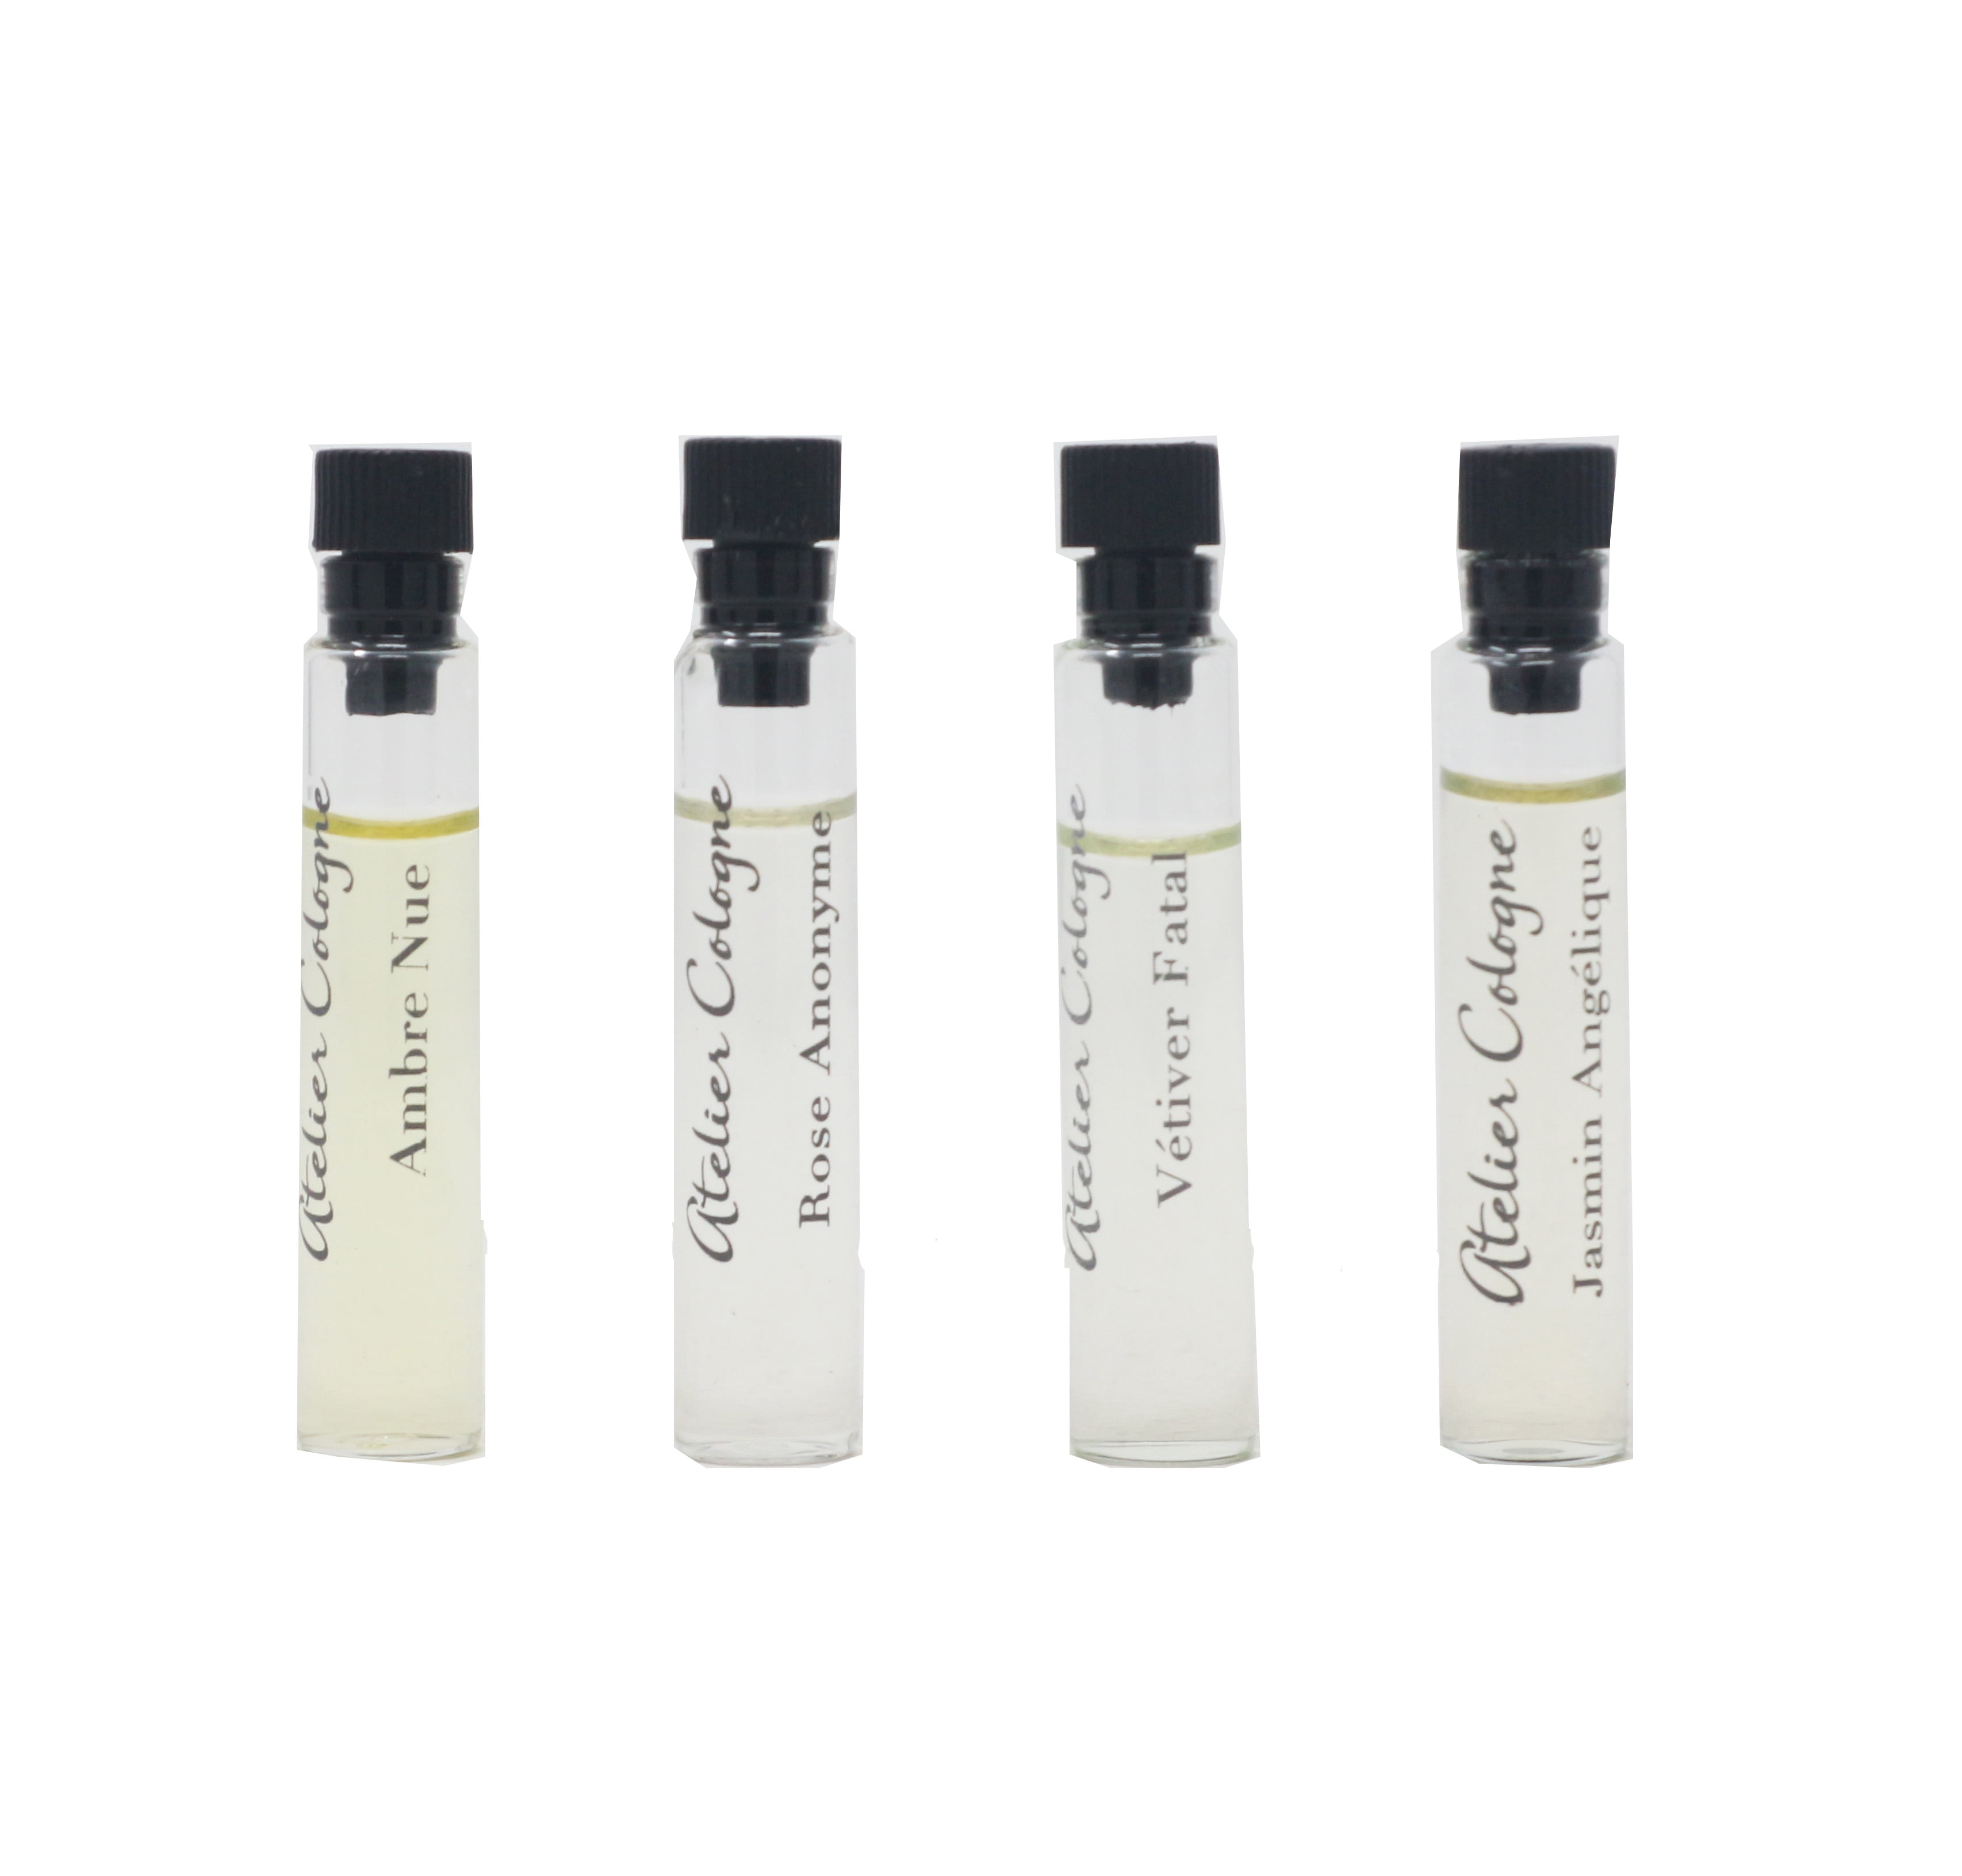 Atelier Cologne Avant Garde Collection Cologne Absolue 4 X 2ml With ...